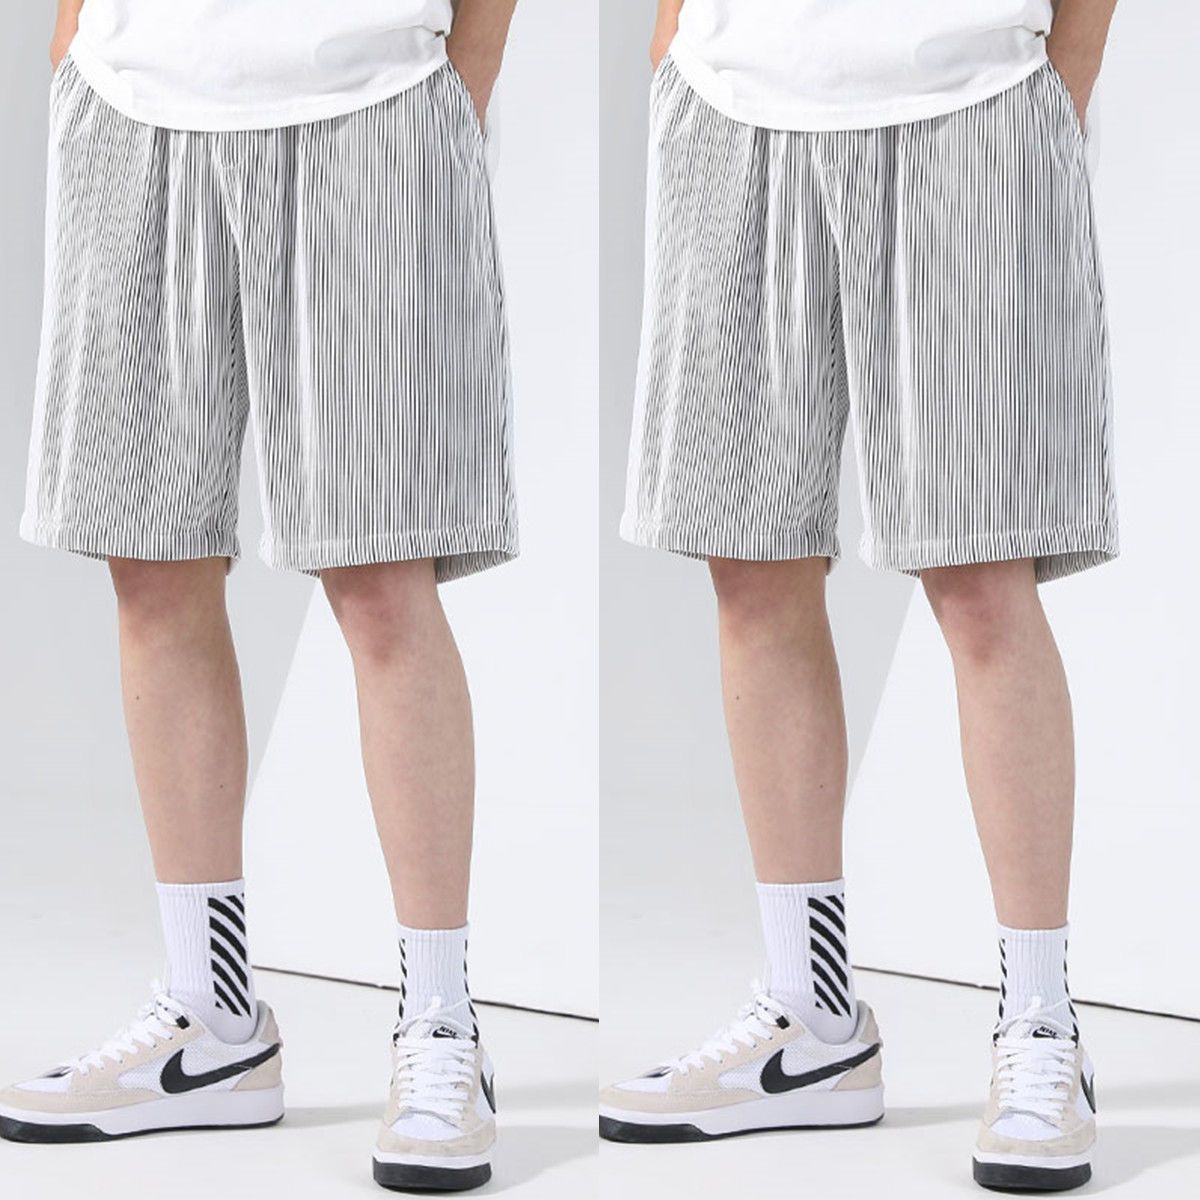 Summer five-point pants air-conditioning ice silk pants men's sports shorts men's loose thin section casual plus fat plus size medium pants